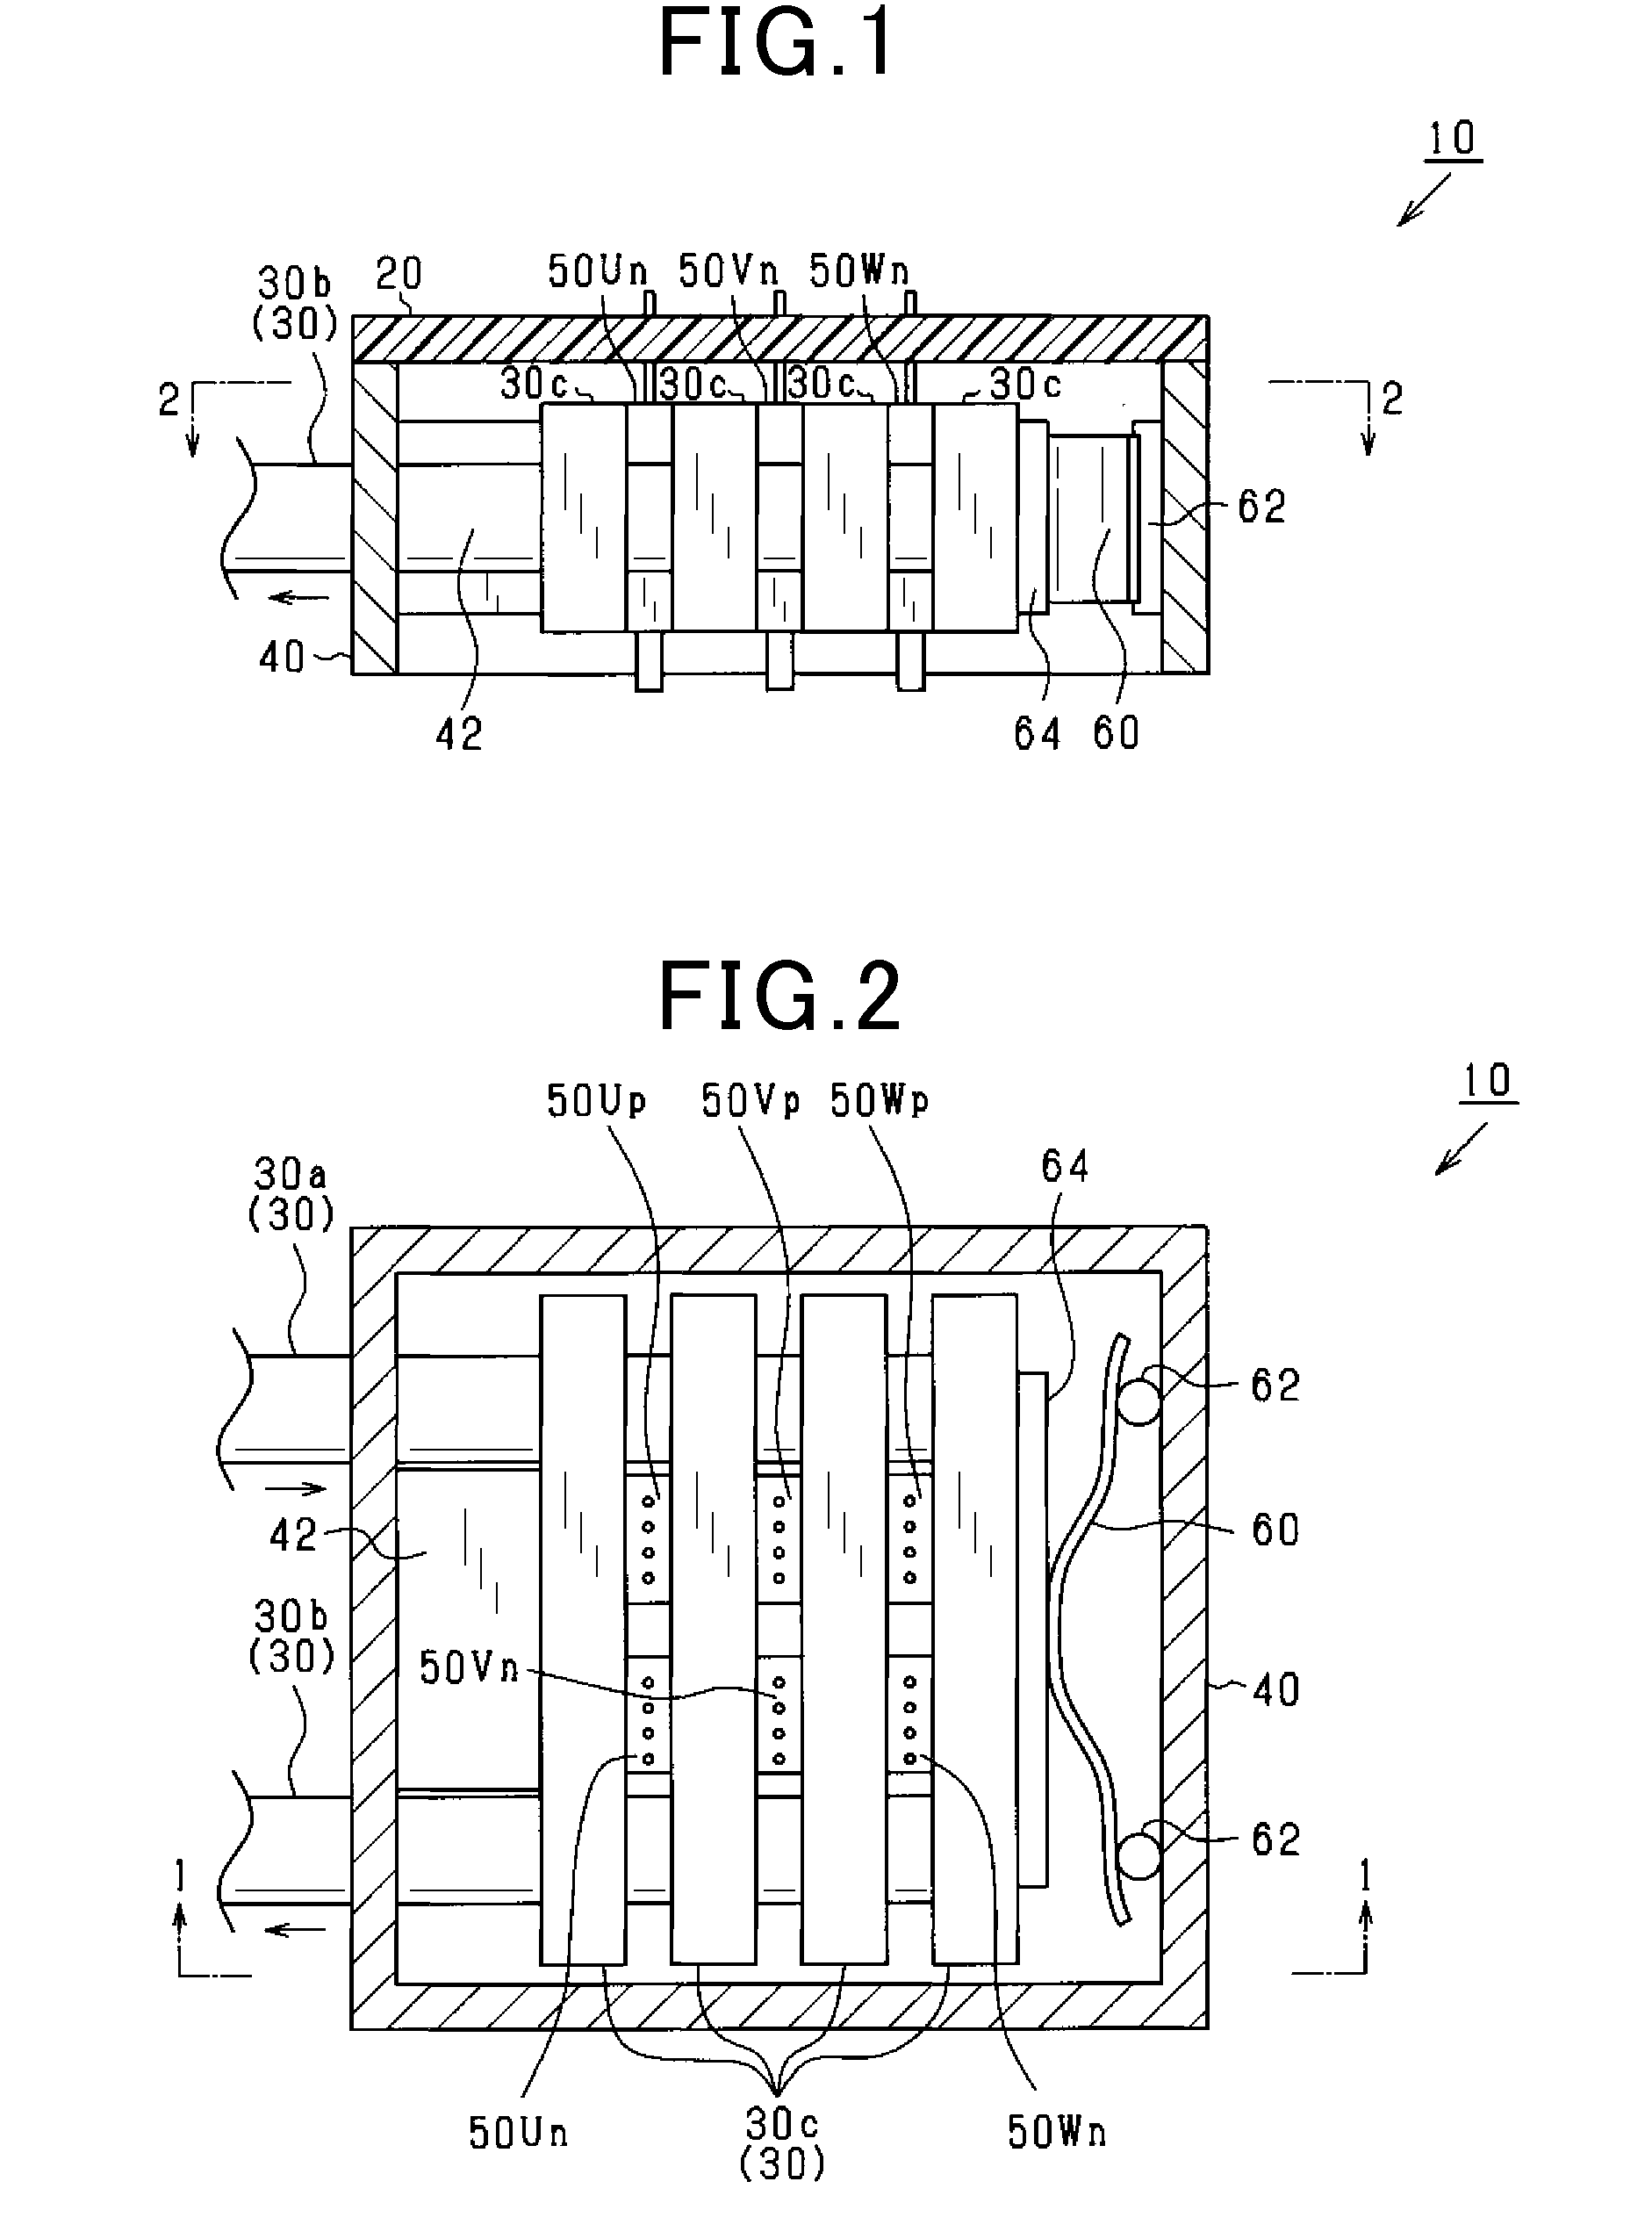 Apparatus for detecting temperature of semiconductor elements for power conversion